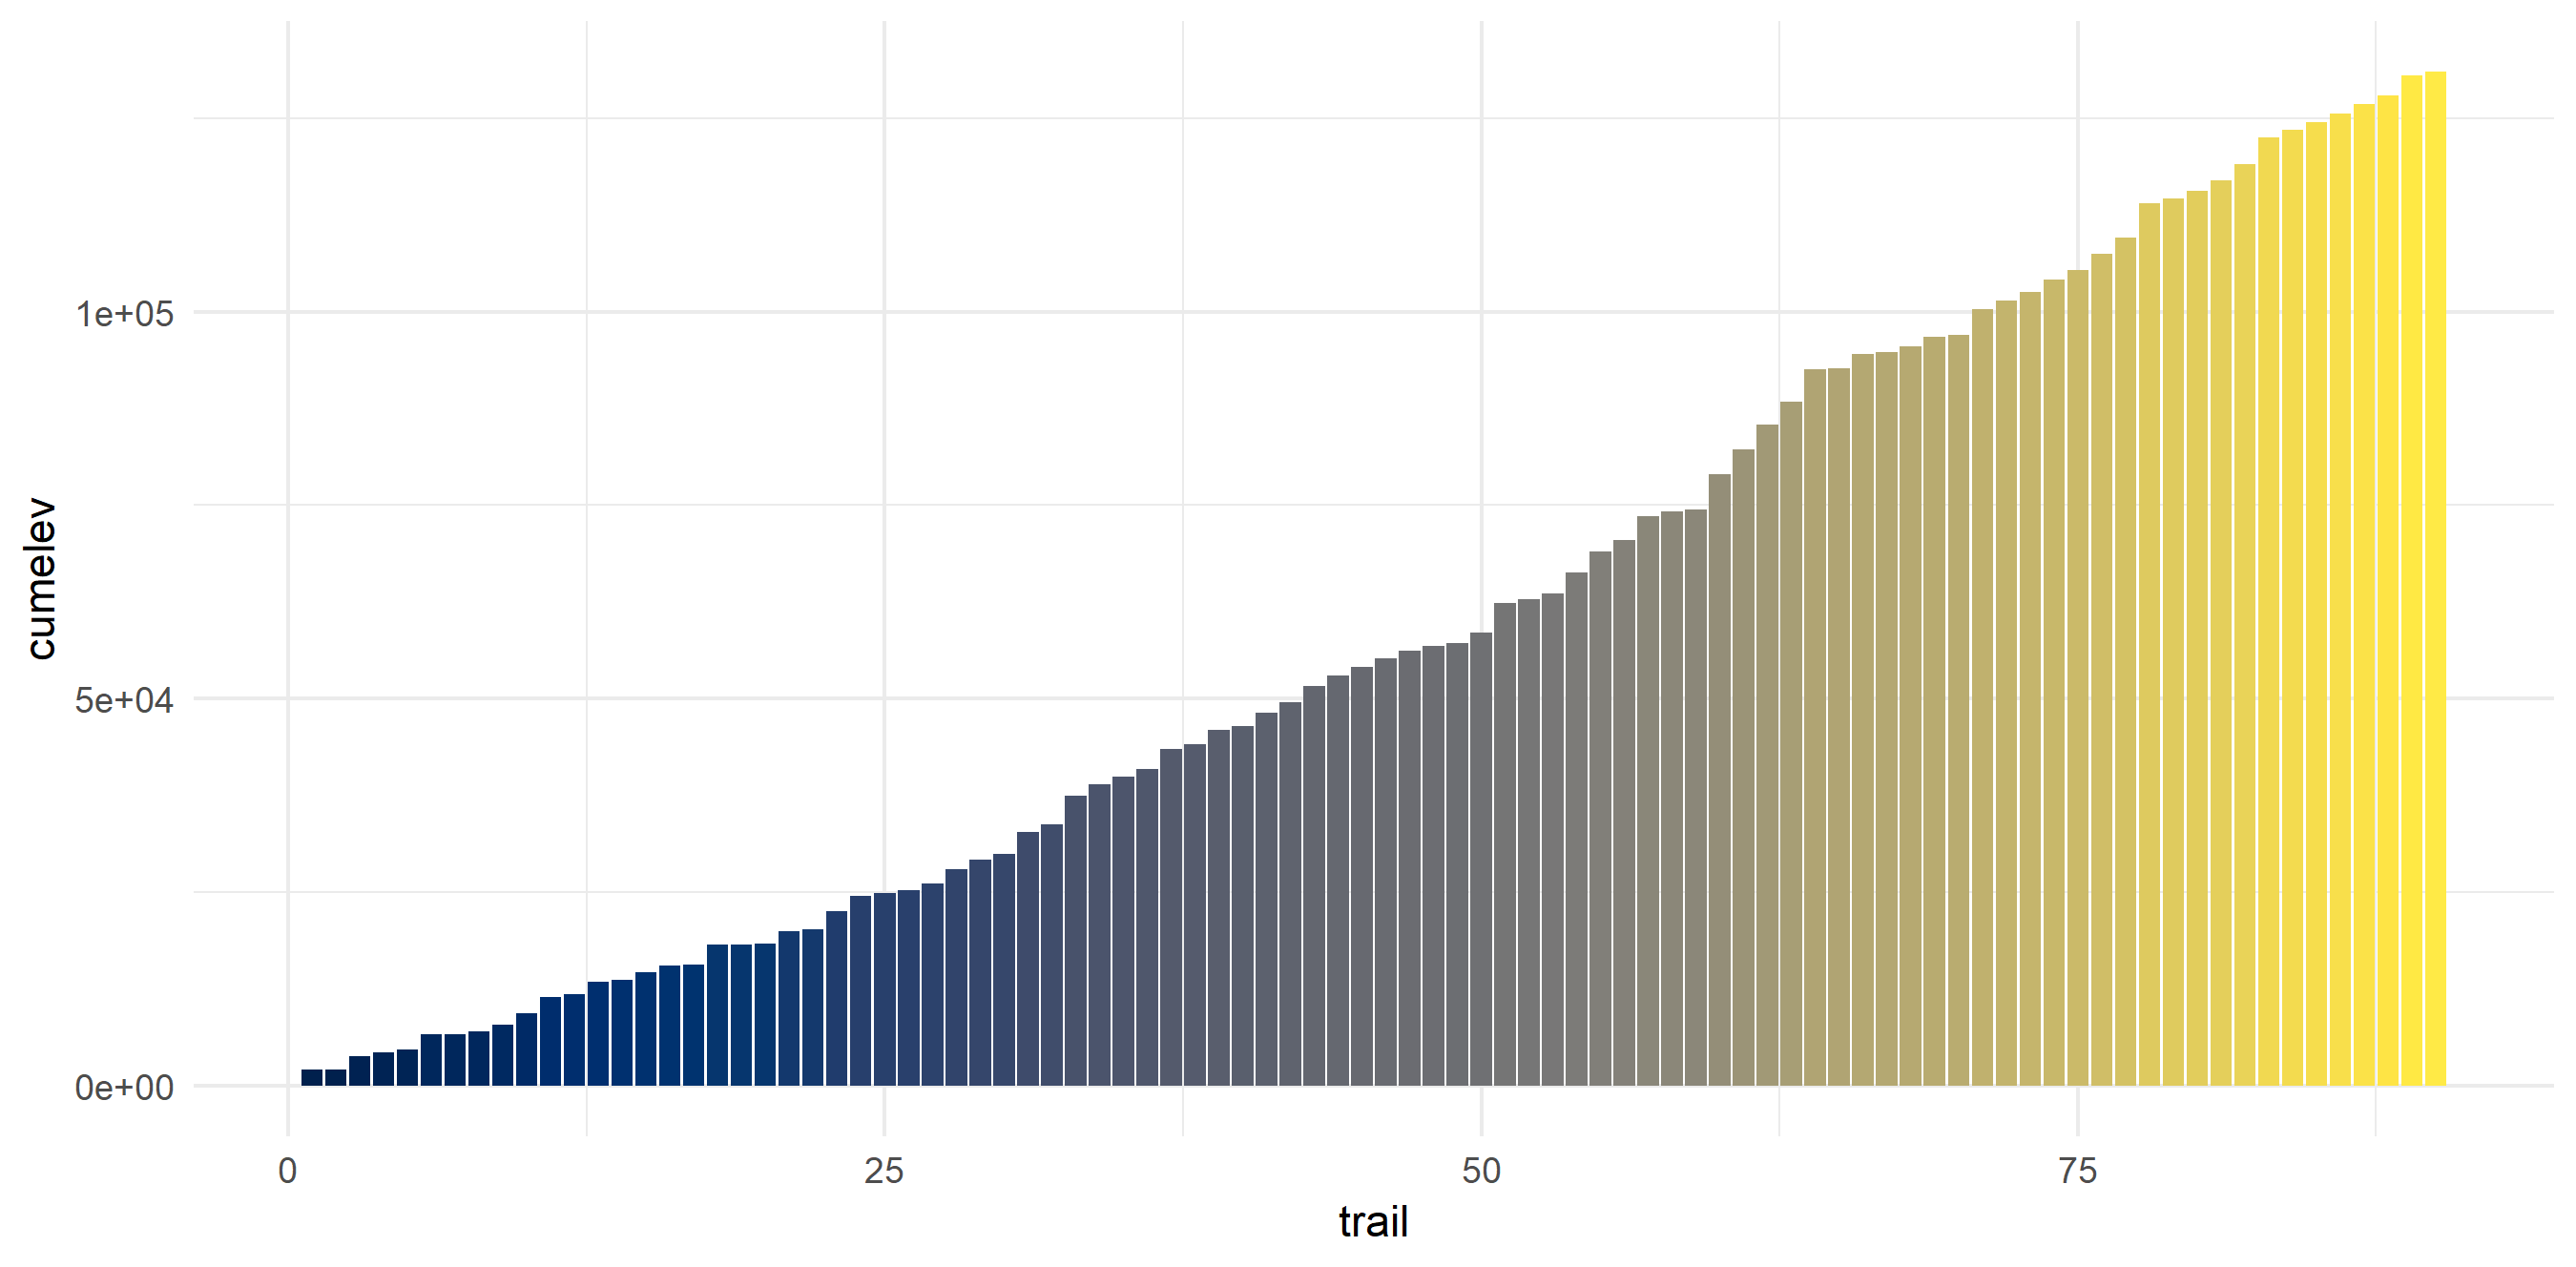 Cumulative bar plot of elevation increasing from left to right and colored by a gradient